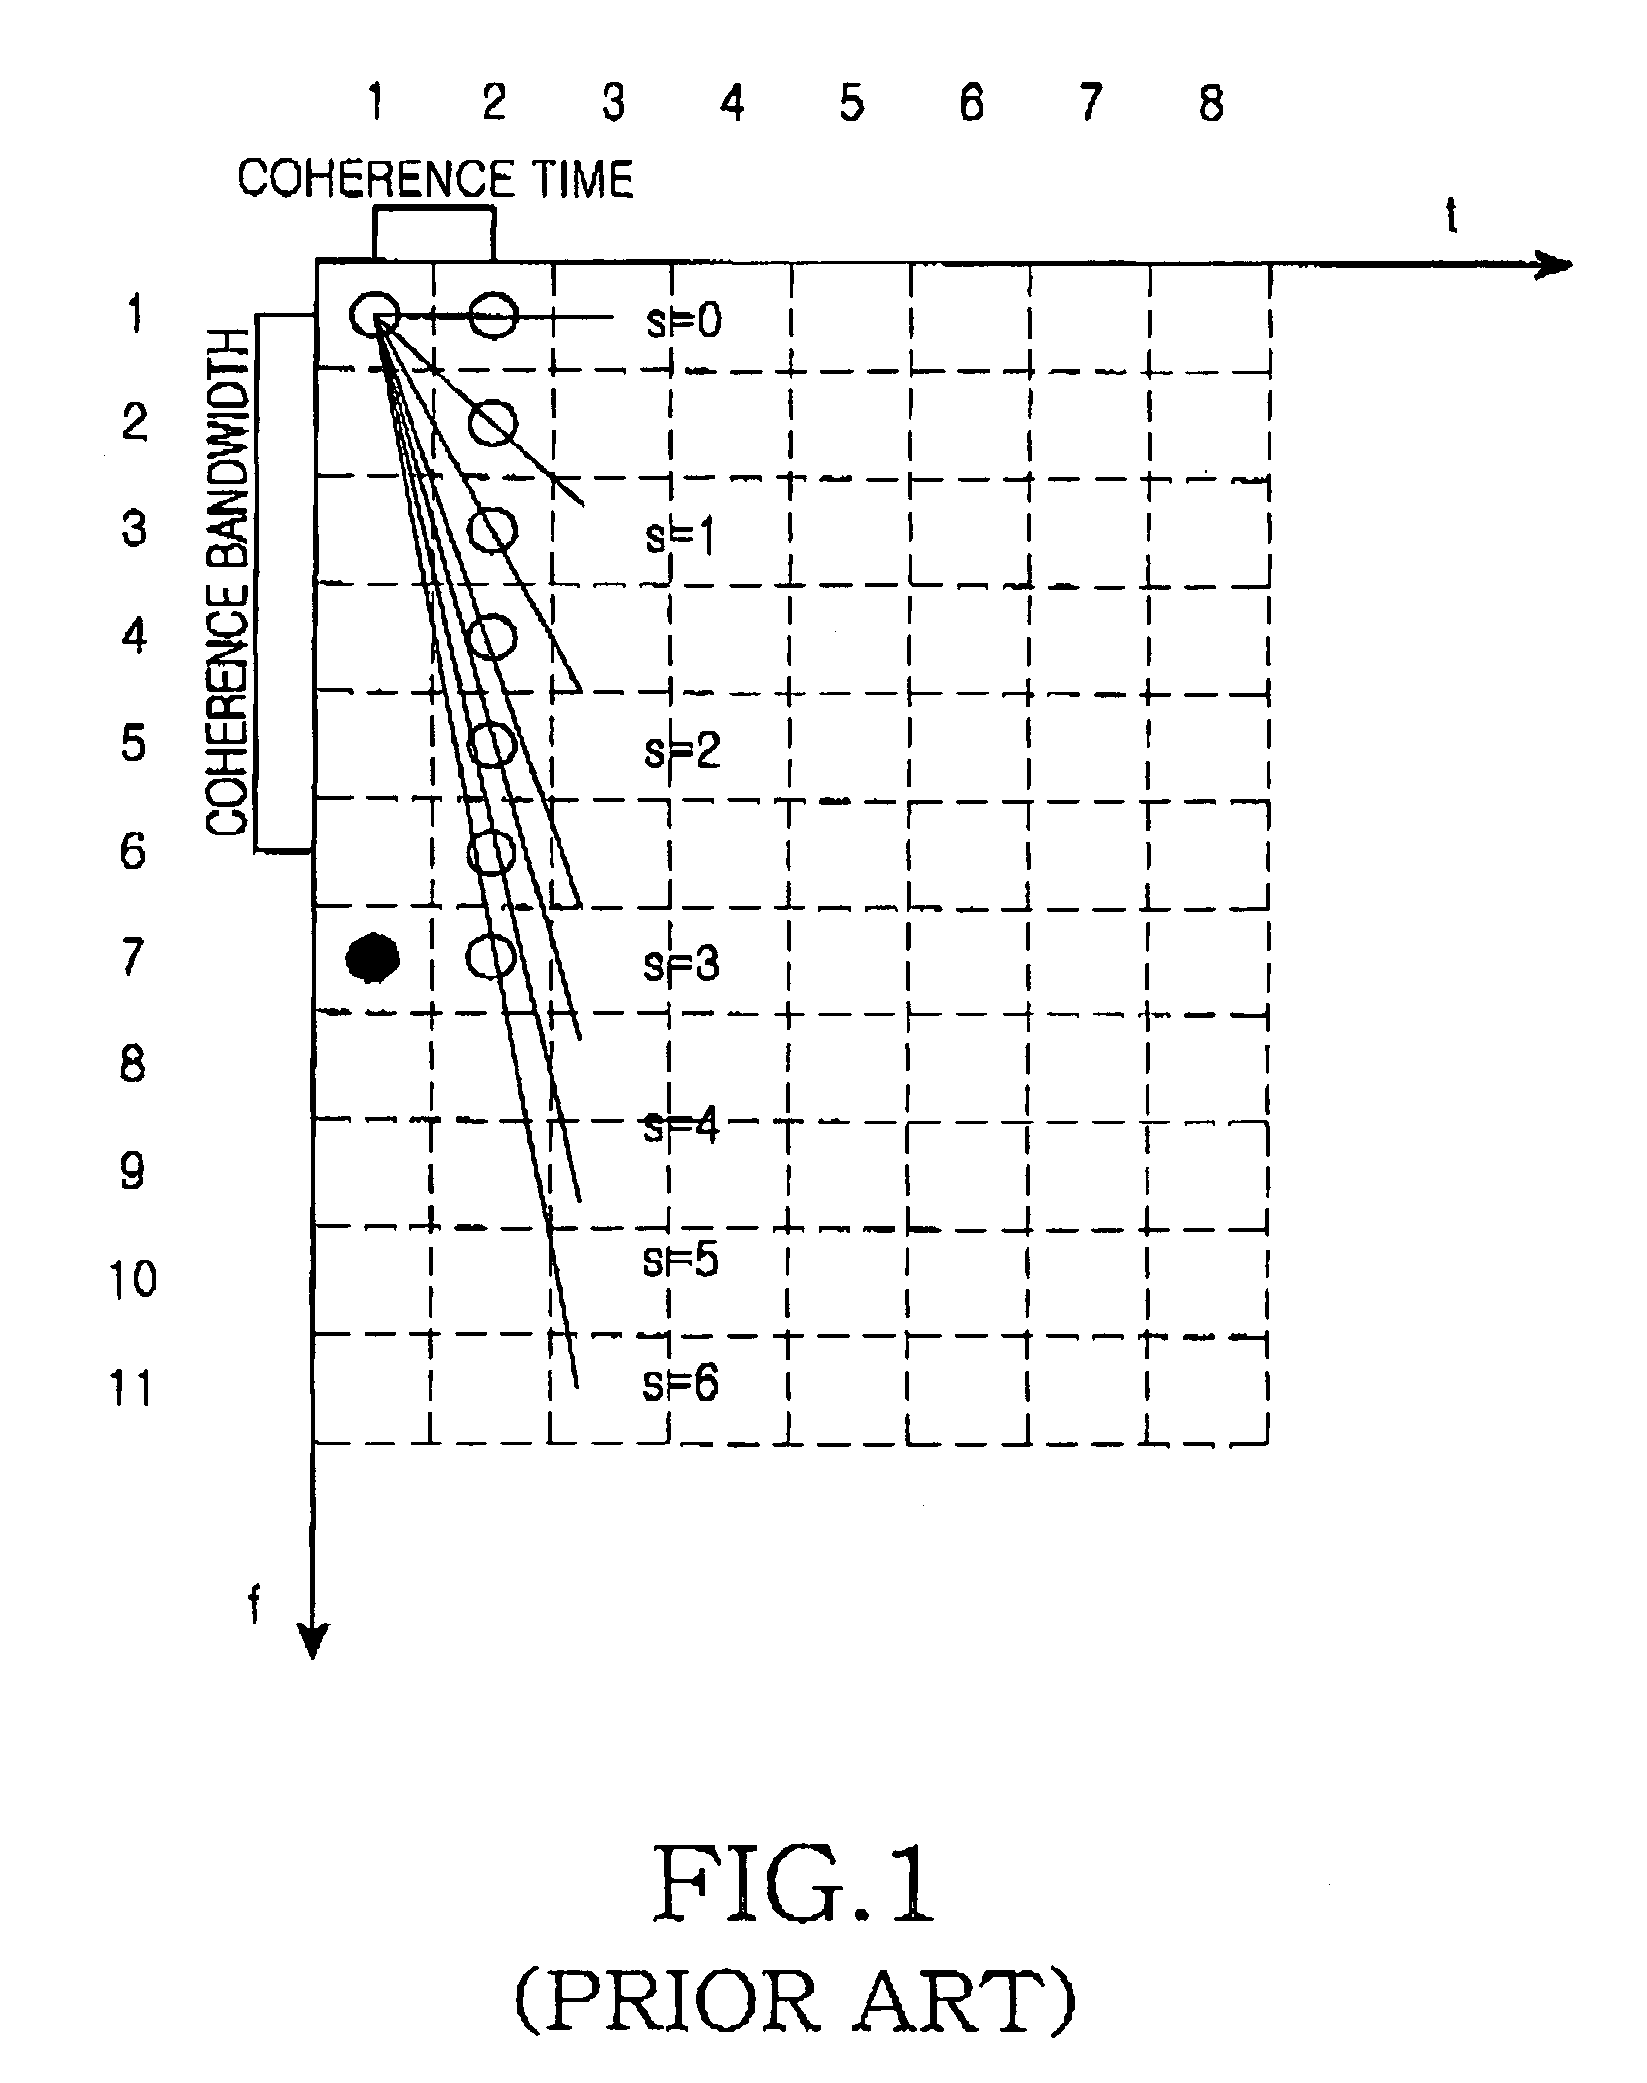 Apparatus and method for transmitting/receiving a pilot signal for distinguishing a base station in a communication system using an OFDM scheme